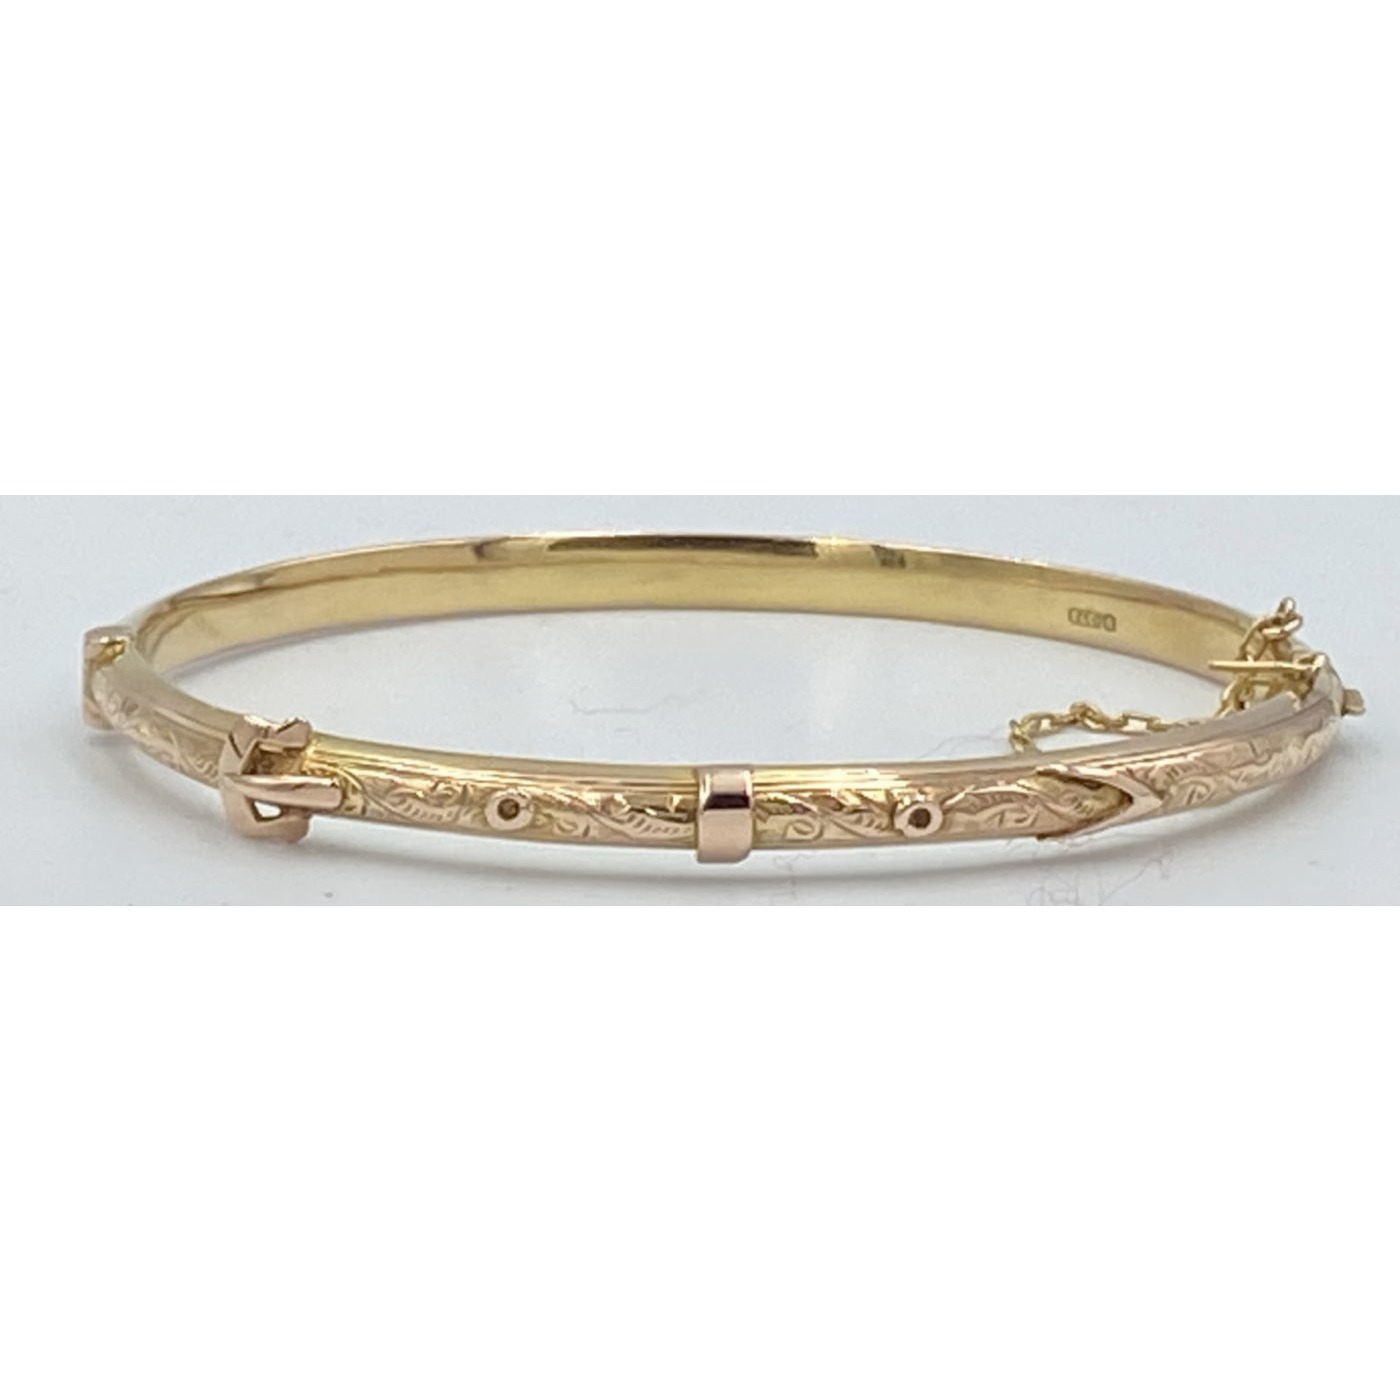 Exceptional Narrow GOLD Buckle Bangle